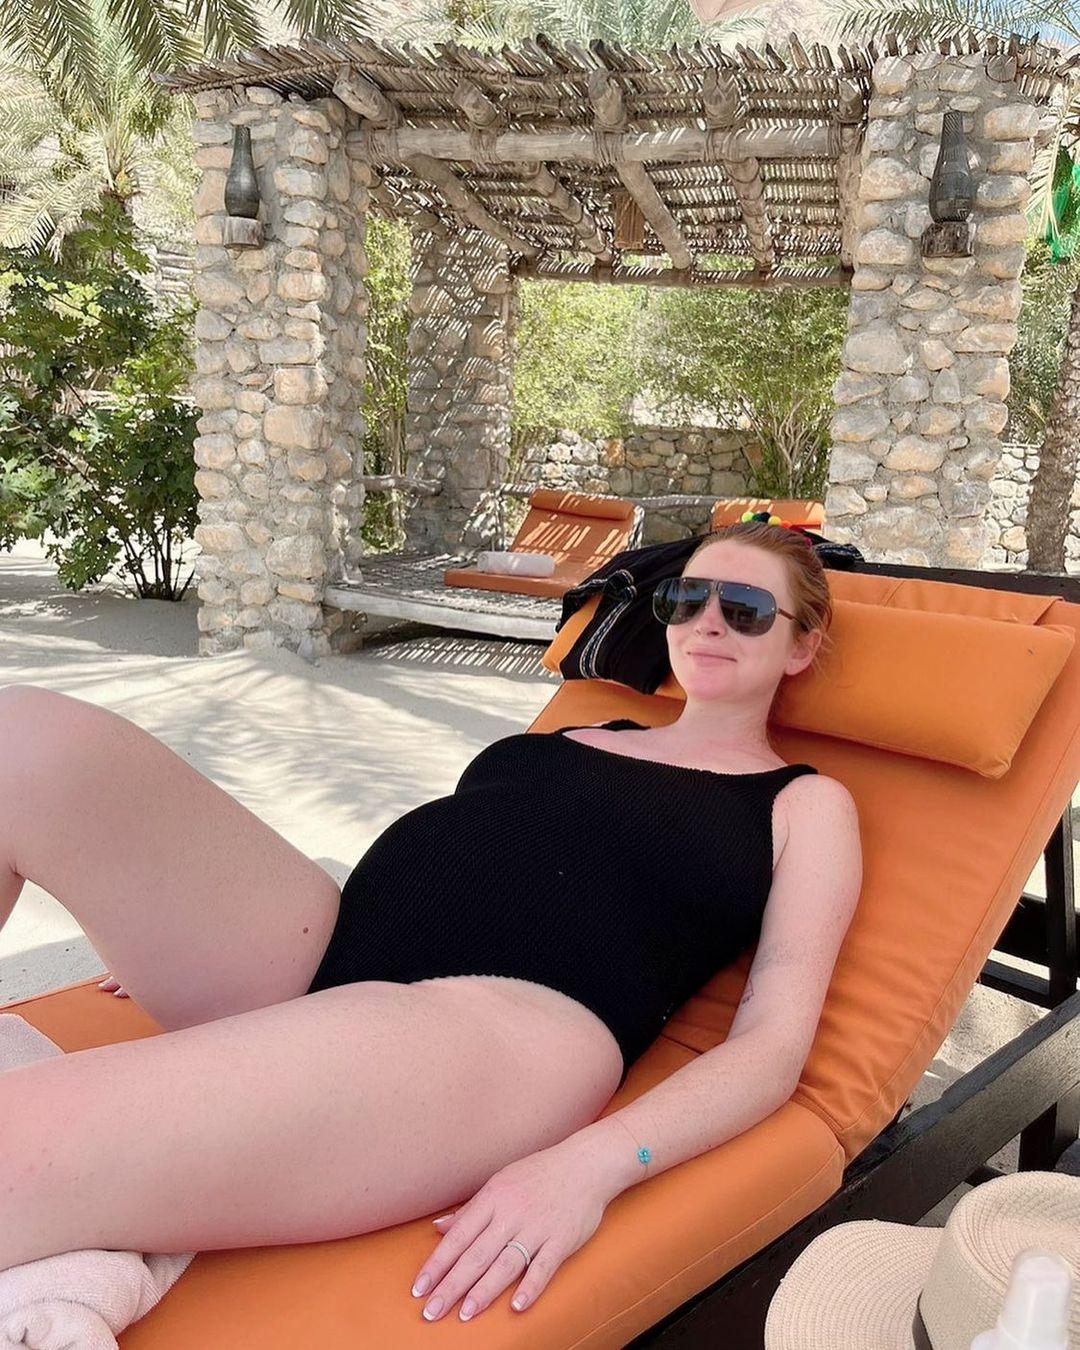 Actress Lindsay Lohan shared a photo of her baby bump as she lounged on a pool chair in a swimsuit. The 36-year-old actress was certainly glowing in her latest Instagram snap in which she relaxed on a sun lounger in a classic black swimsuit.